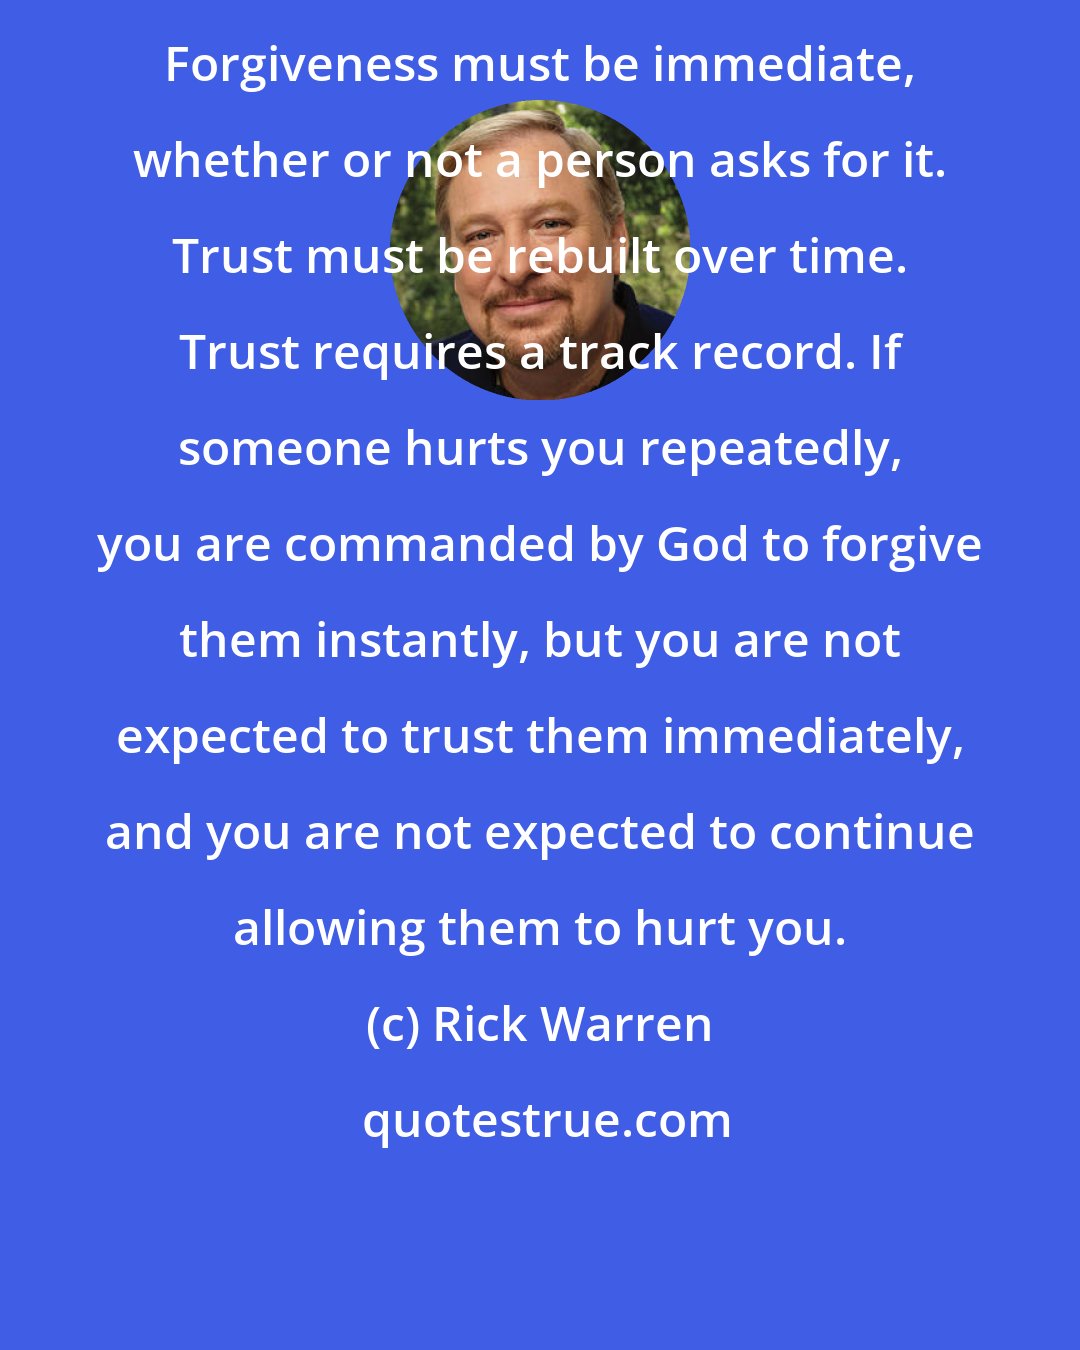 Rick Warren: Forgiveness must be immediate, whether or not a person asks for it. Trust must be rebuilt over time. Trust requires a track record. If someone hurts you repeatedly, you are commanded by God to forgive them instantly, but you are not expected to trust them immediately, and you are not expected to continue allowing them to hurt you.